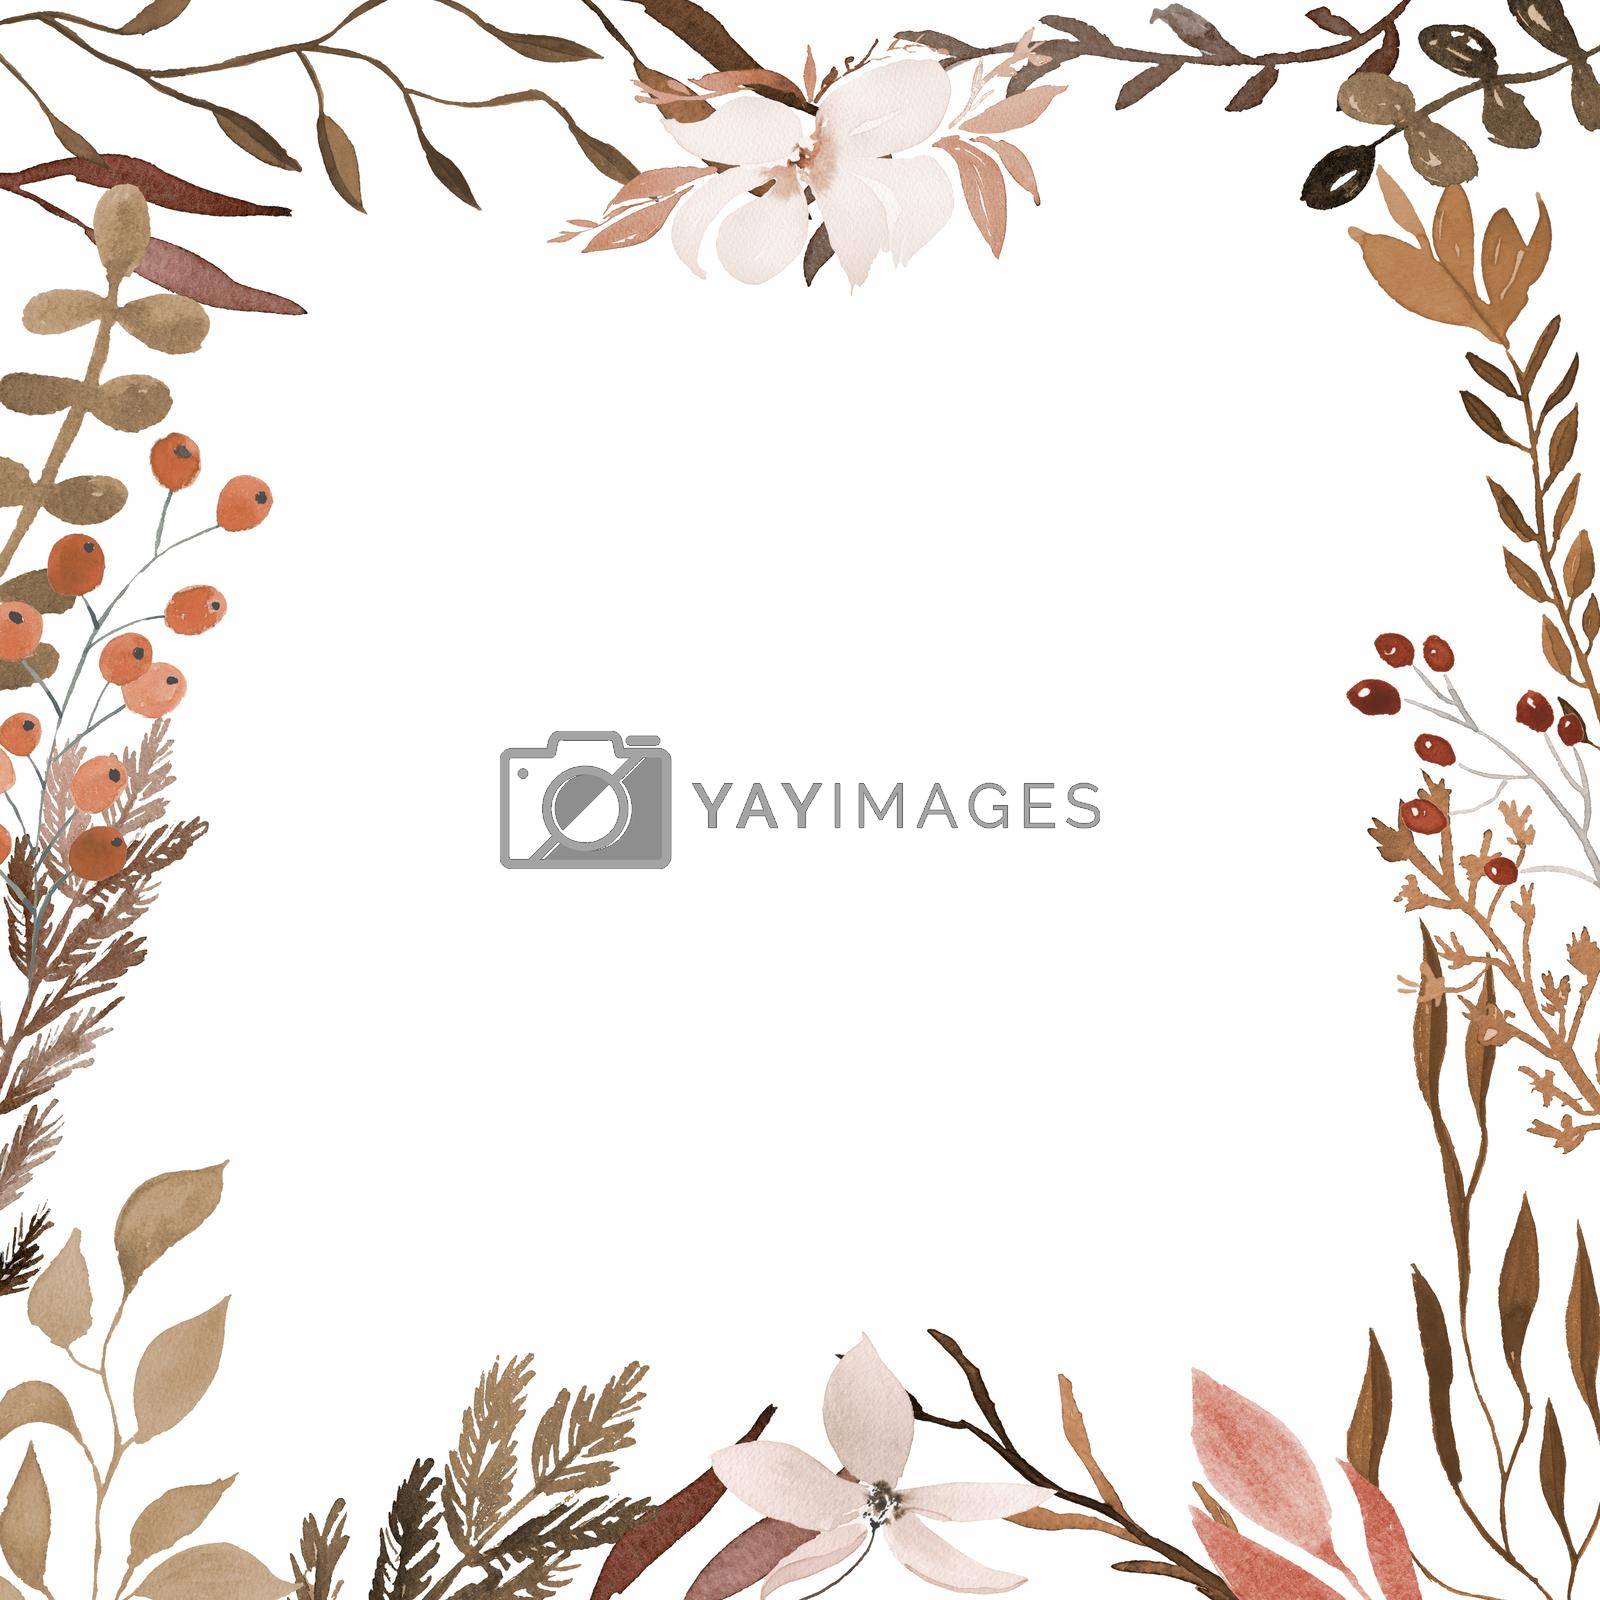 Royalty free image of watercolor flower frame border with flowers and leaves. Spring ornament concept. Flower poster, invitation. Decorative greeting card layout or invitation design background by ANITA